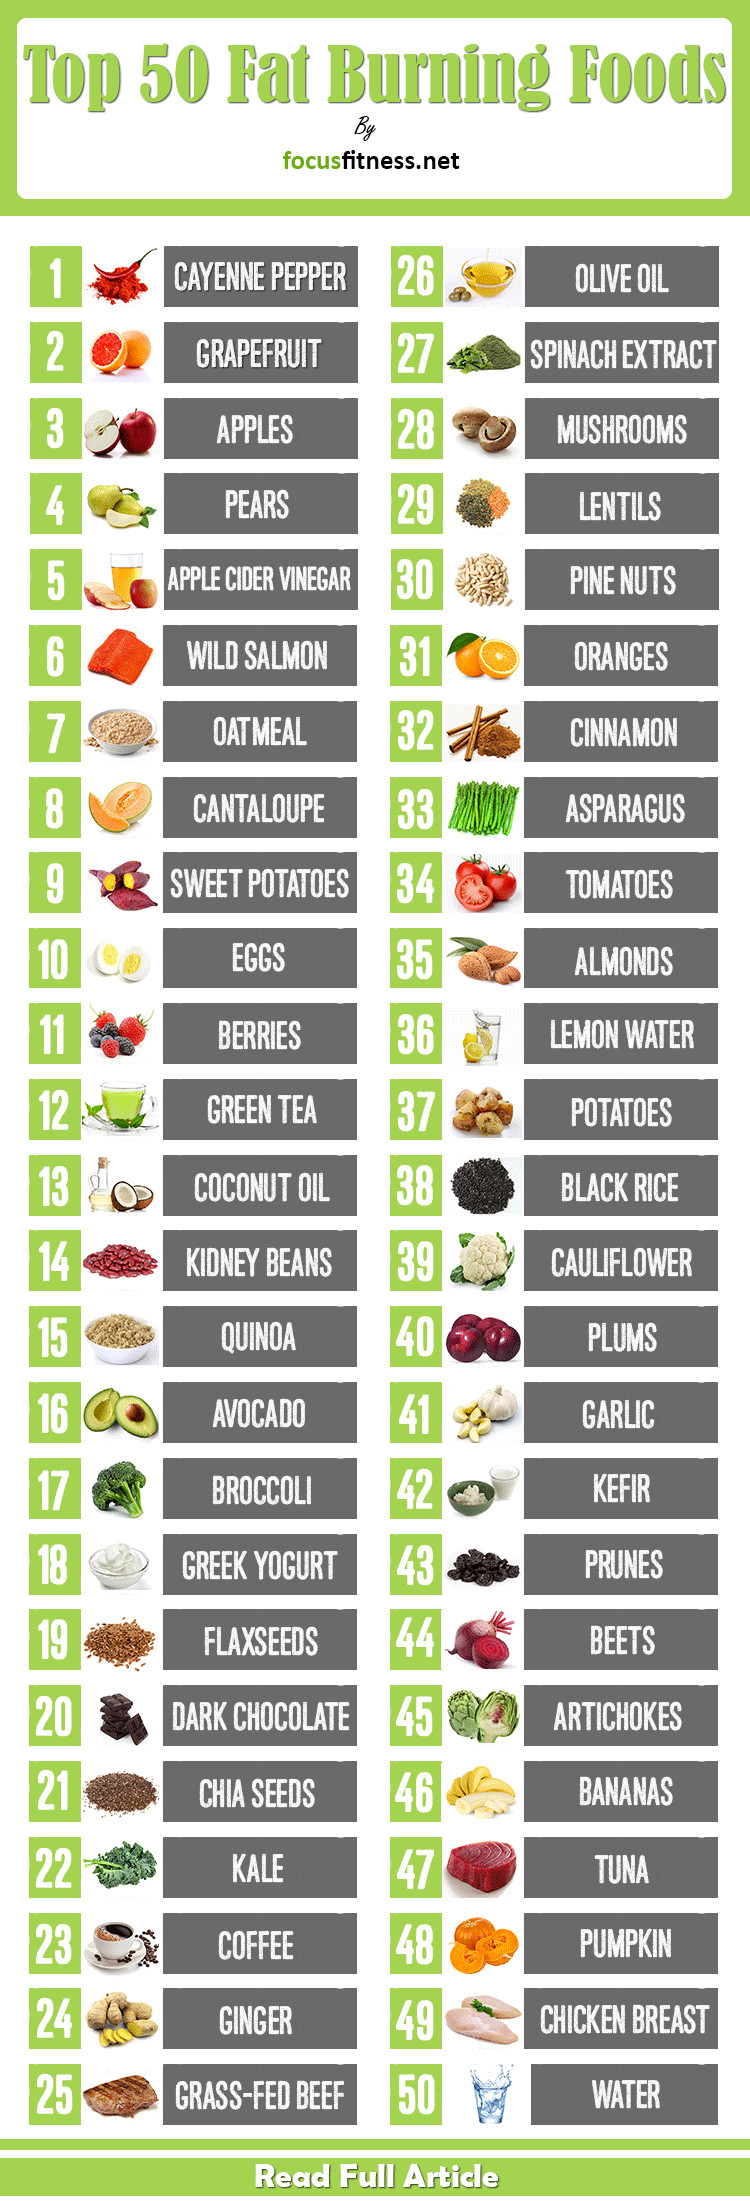 Top Fat Burning Foods
 Top 50 Fat Burning Foods For Weight Loss Focus Fitness